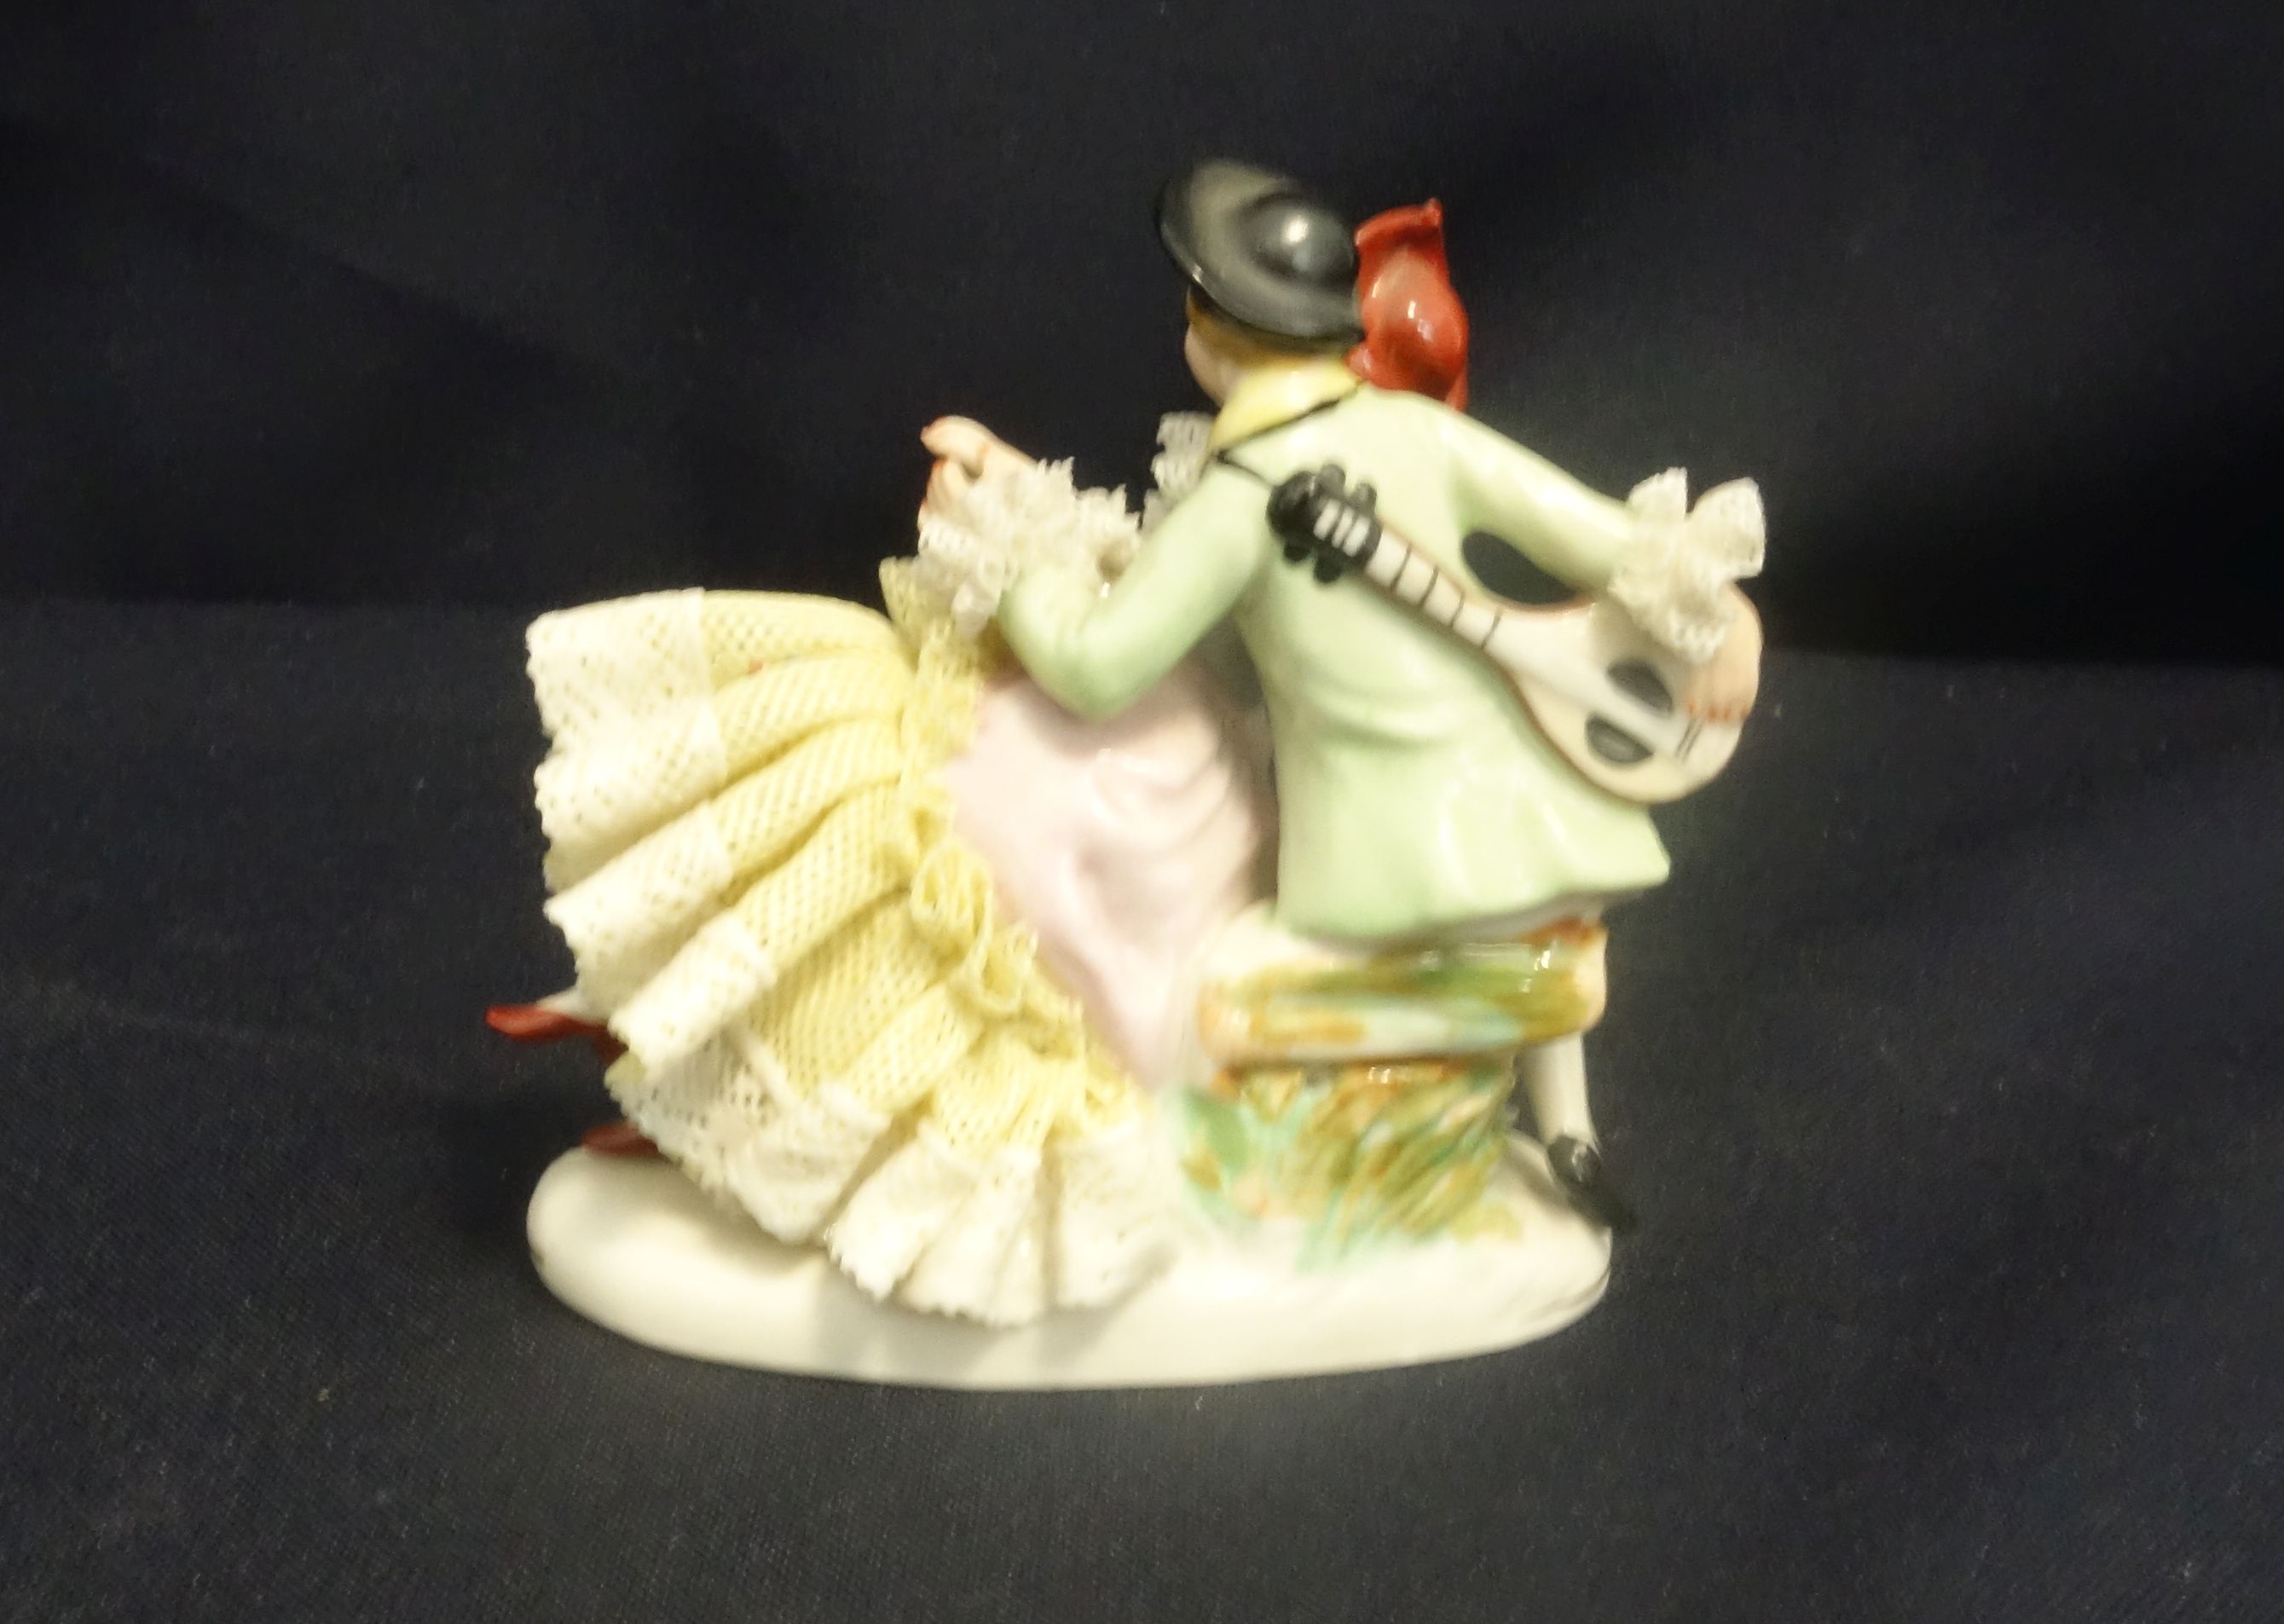 SMALL PORCELAIN FIGURE GROUP / LACE FIGURE - Image 3 of 4